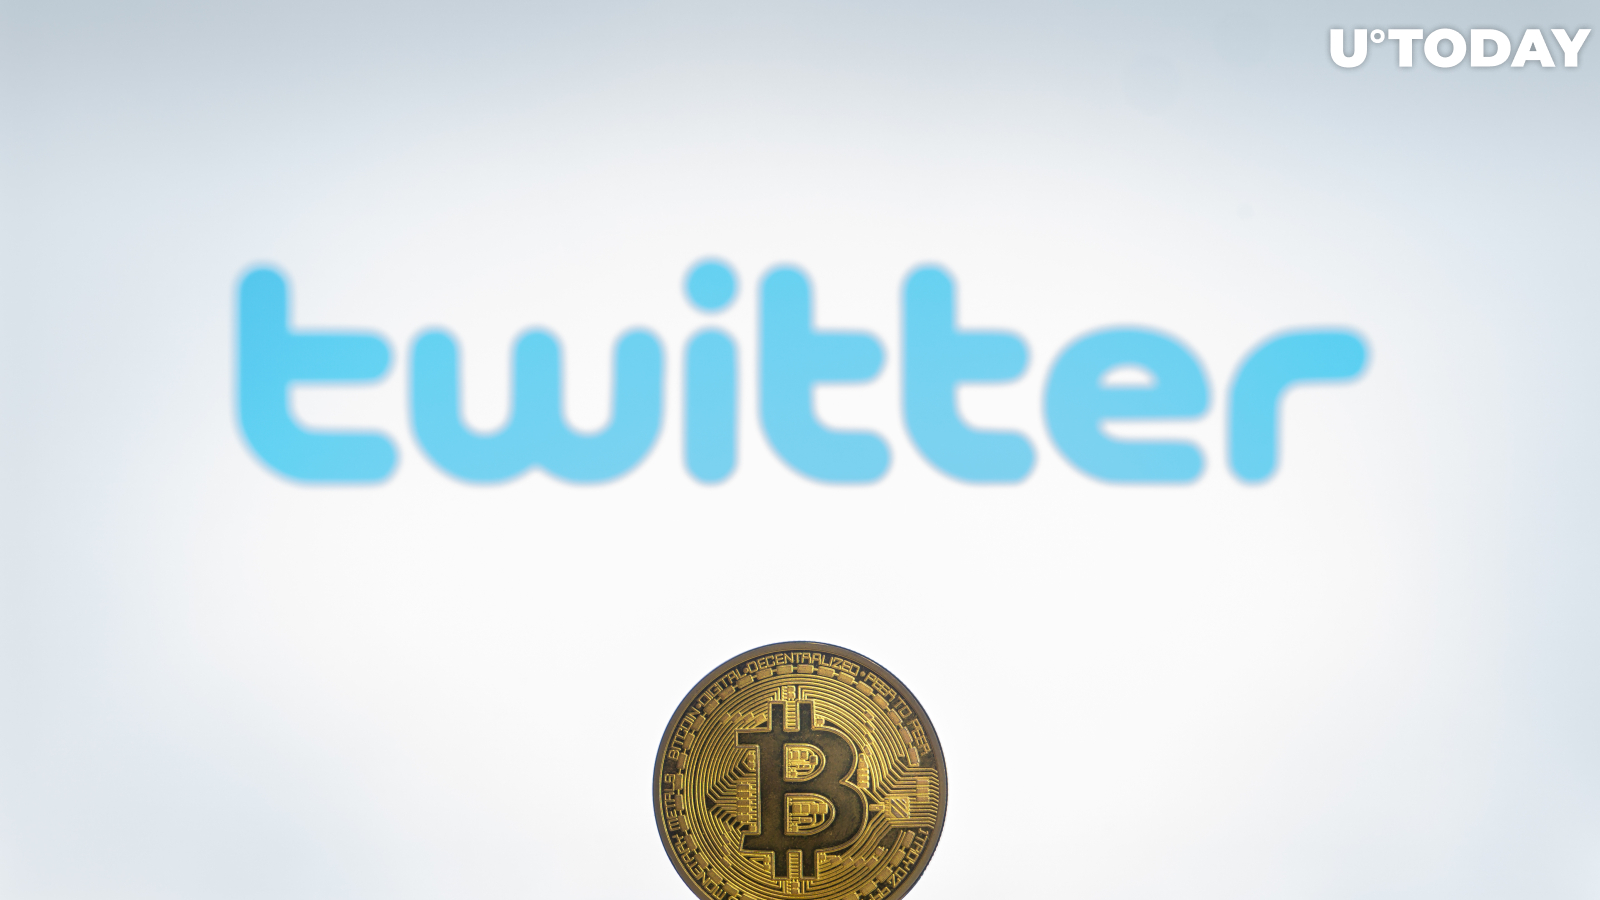 Twitter Launching Bitcoin Tipping Feature